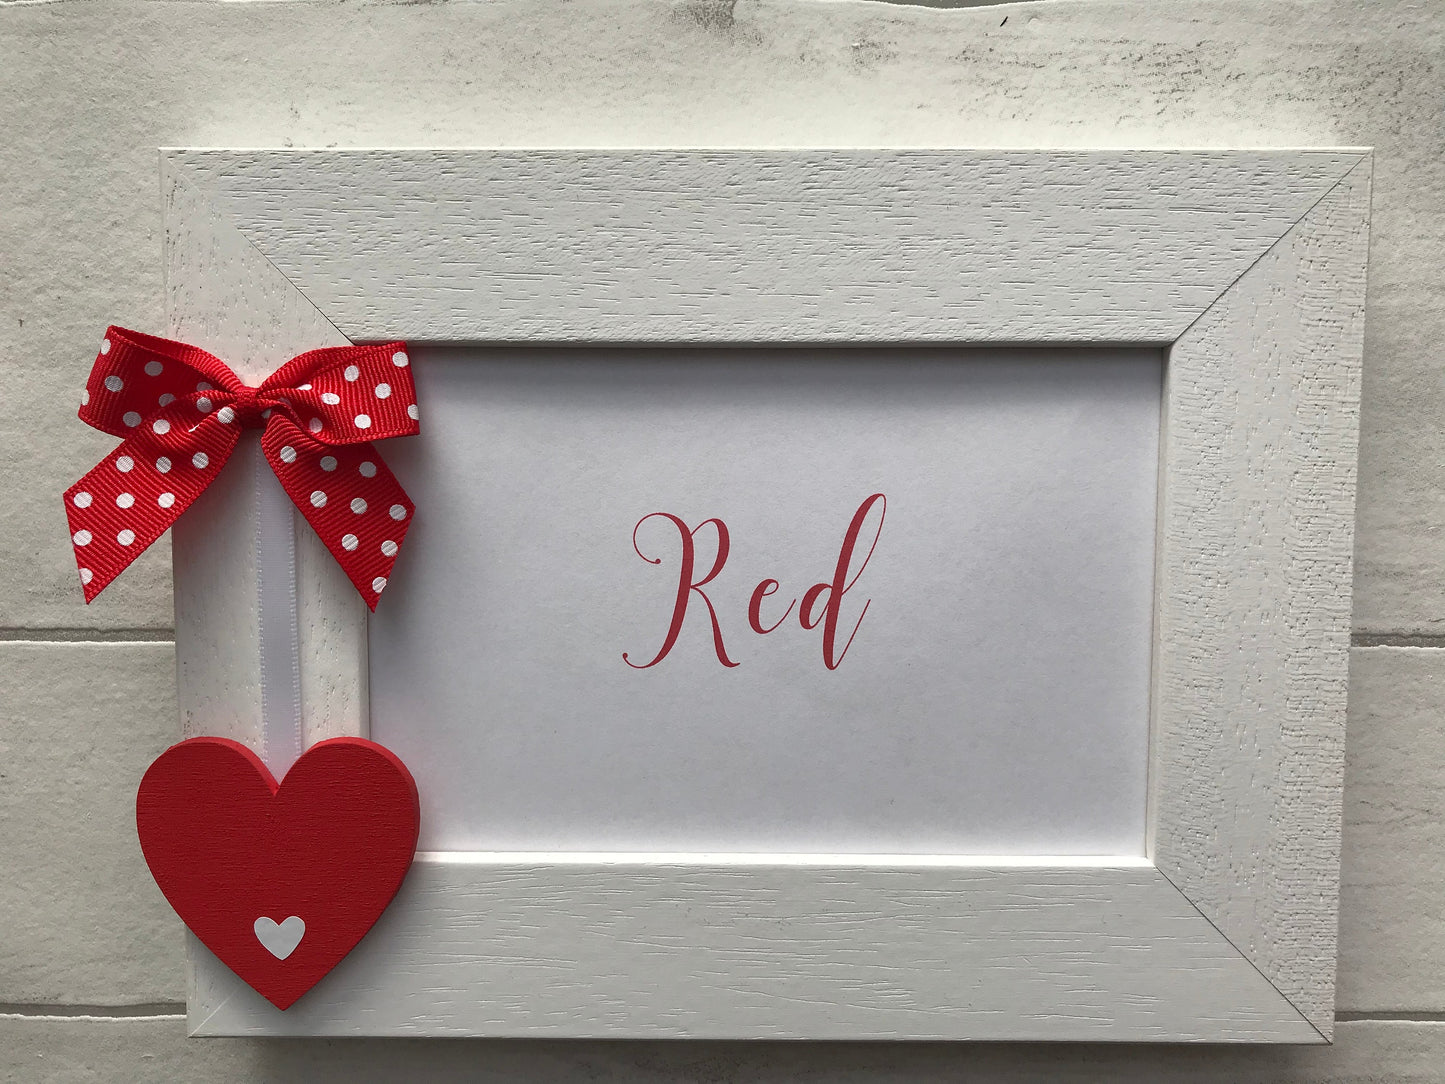 Personalised Happy Valentines Day Wooden Handcrafted Photo Frame